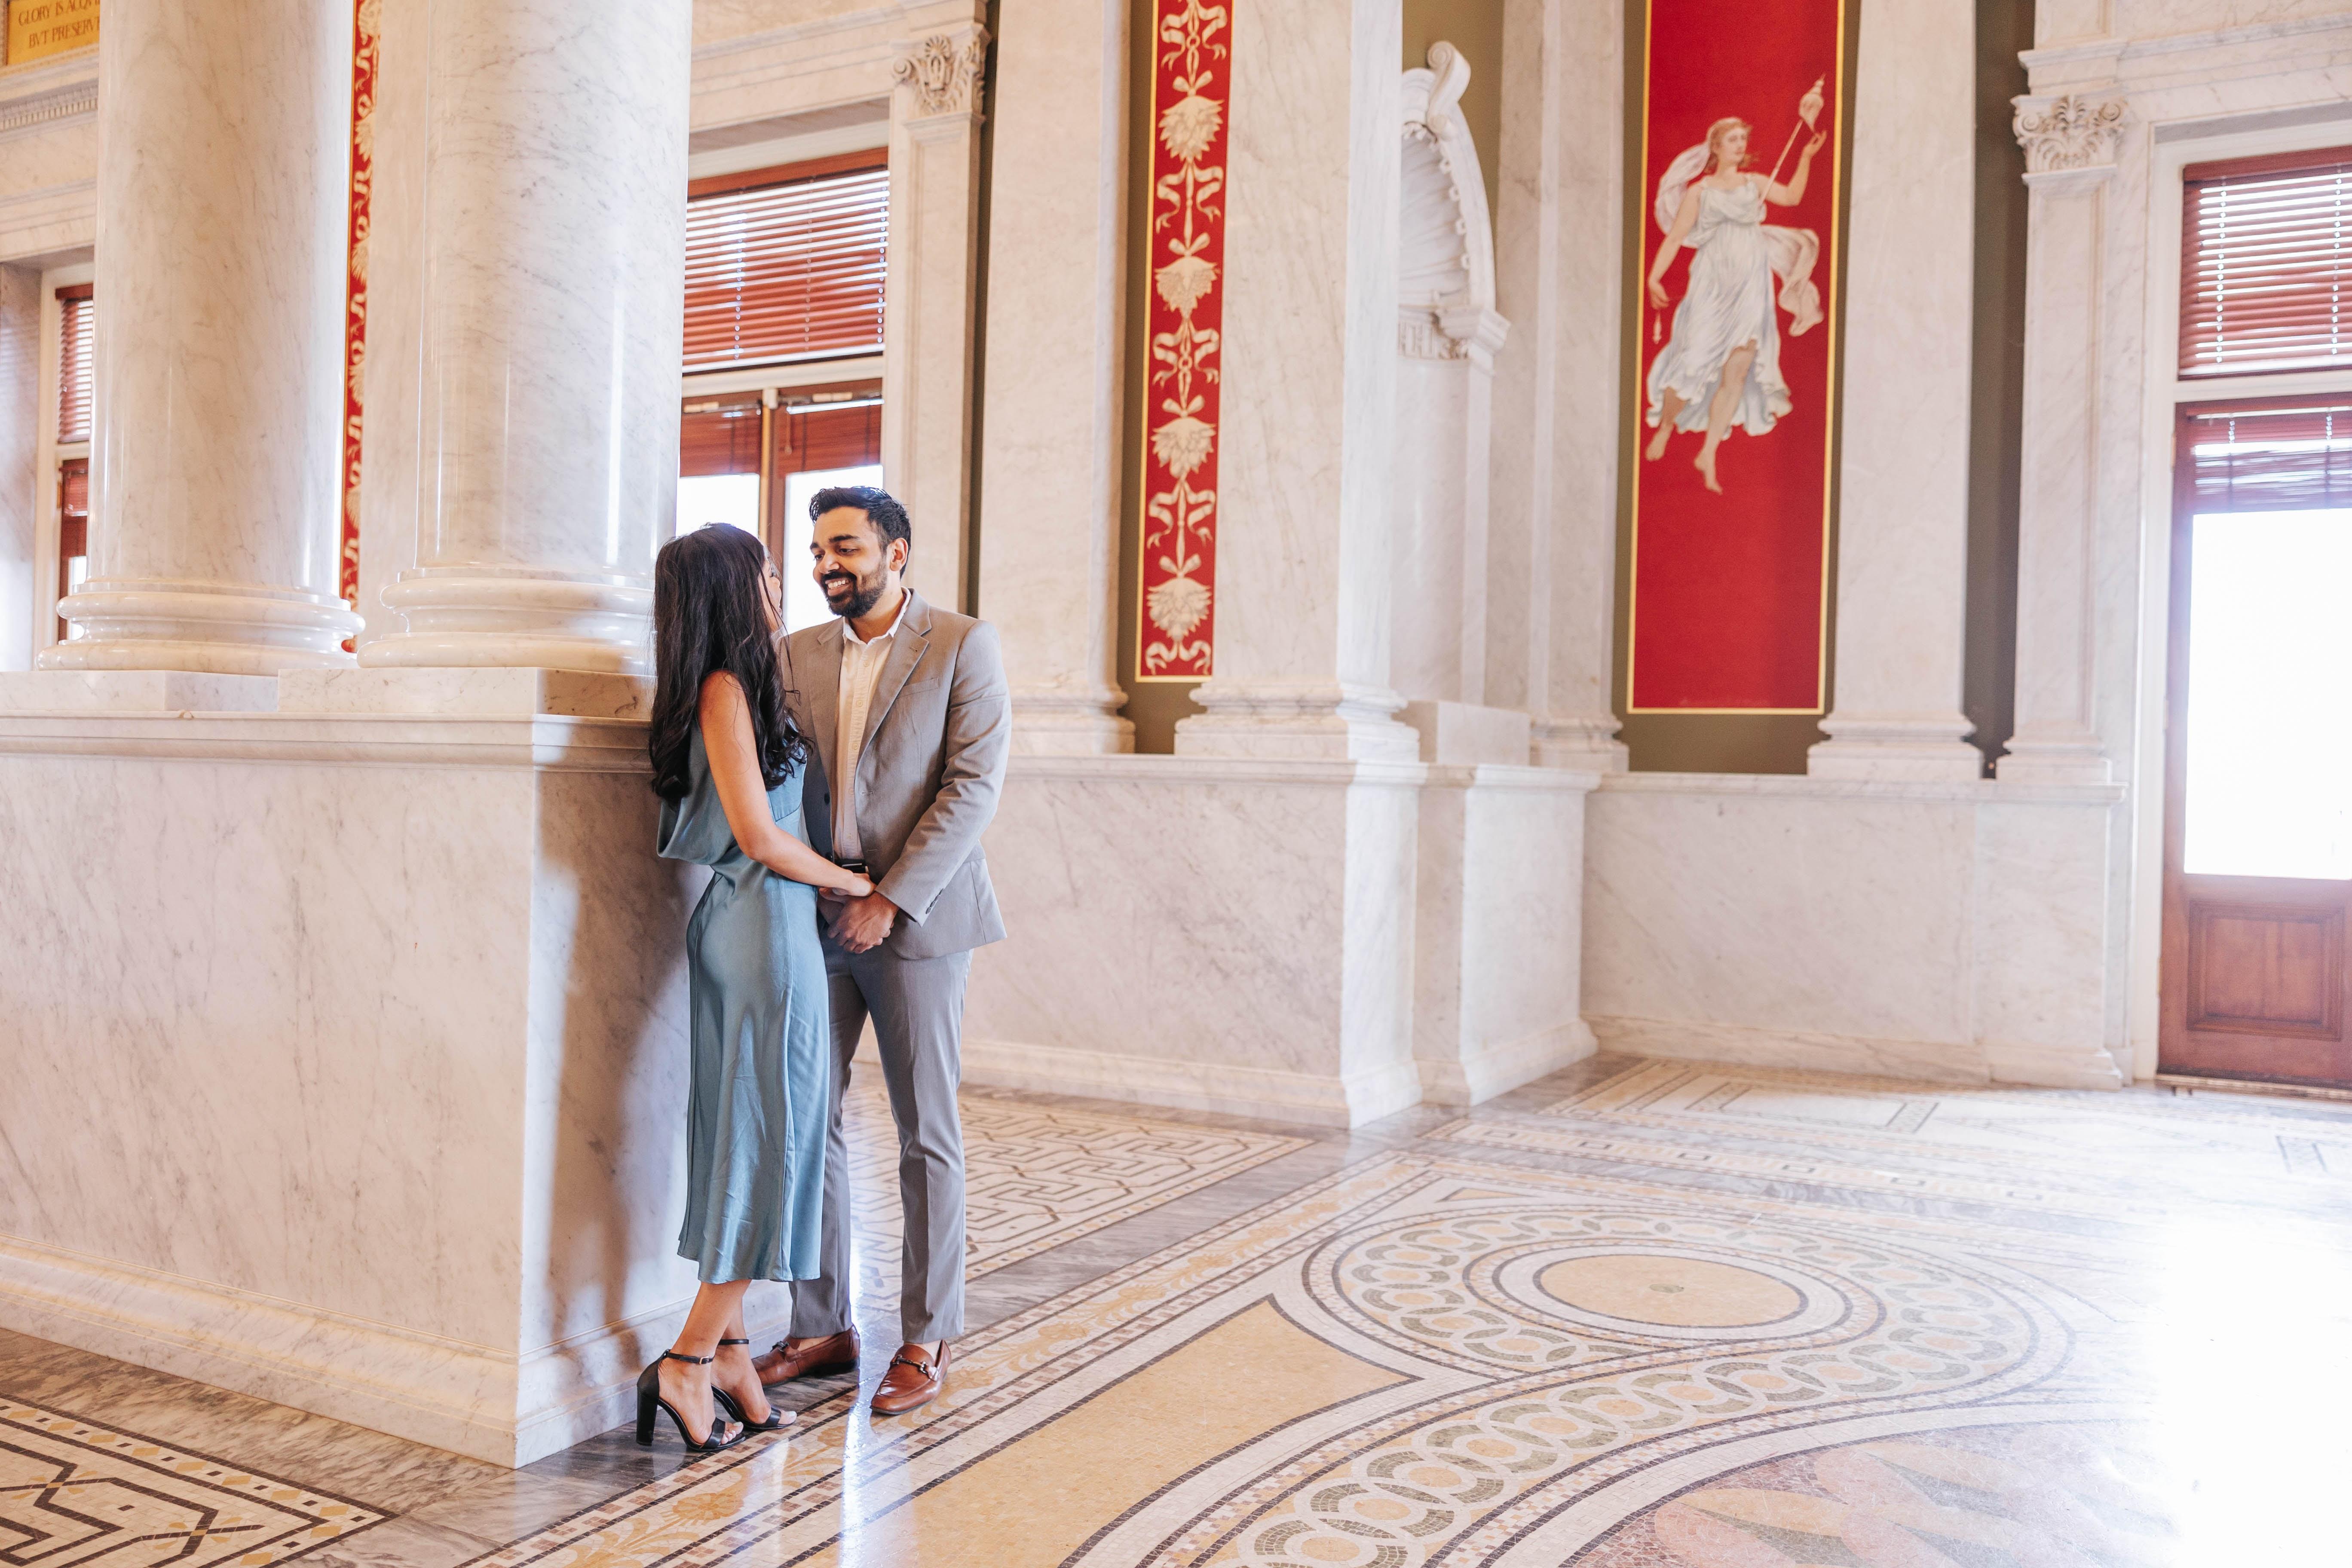 The Wedding Website of Anjali Patel and Maxwell Thakor